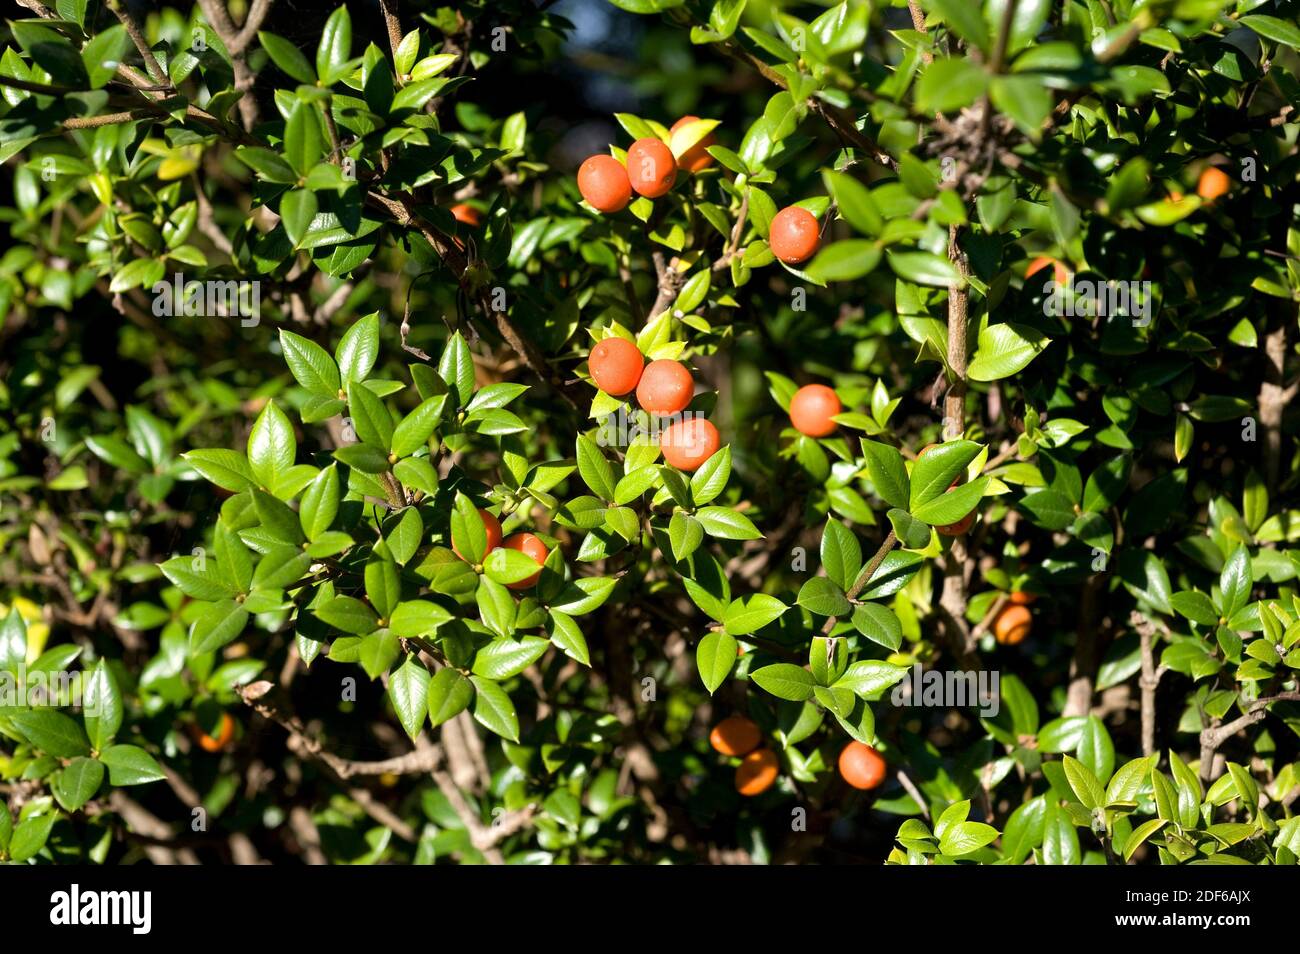 Chainfruit or prickly Alyxia (Alyxia ruscifolia) is a shrub of rainfall areas in Australia. Leaves and fruits detail. Angiosperms. Apocynaceae. Stock Photo